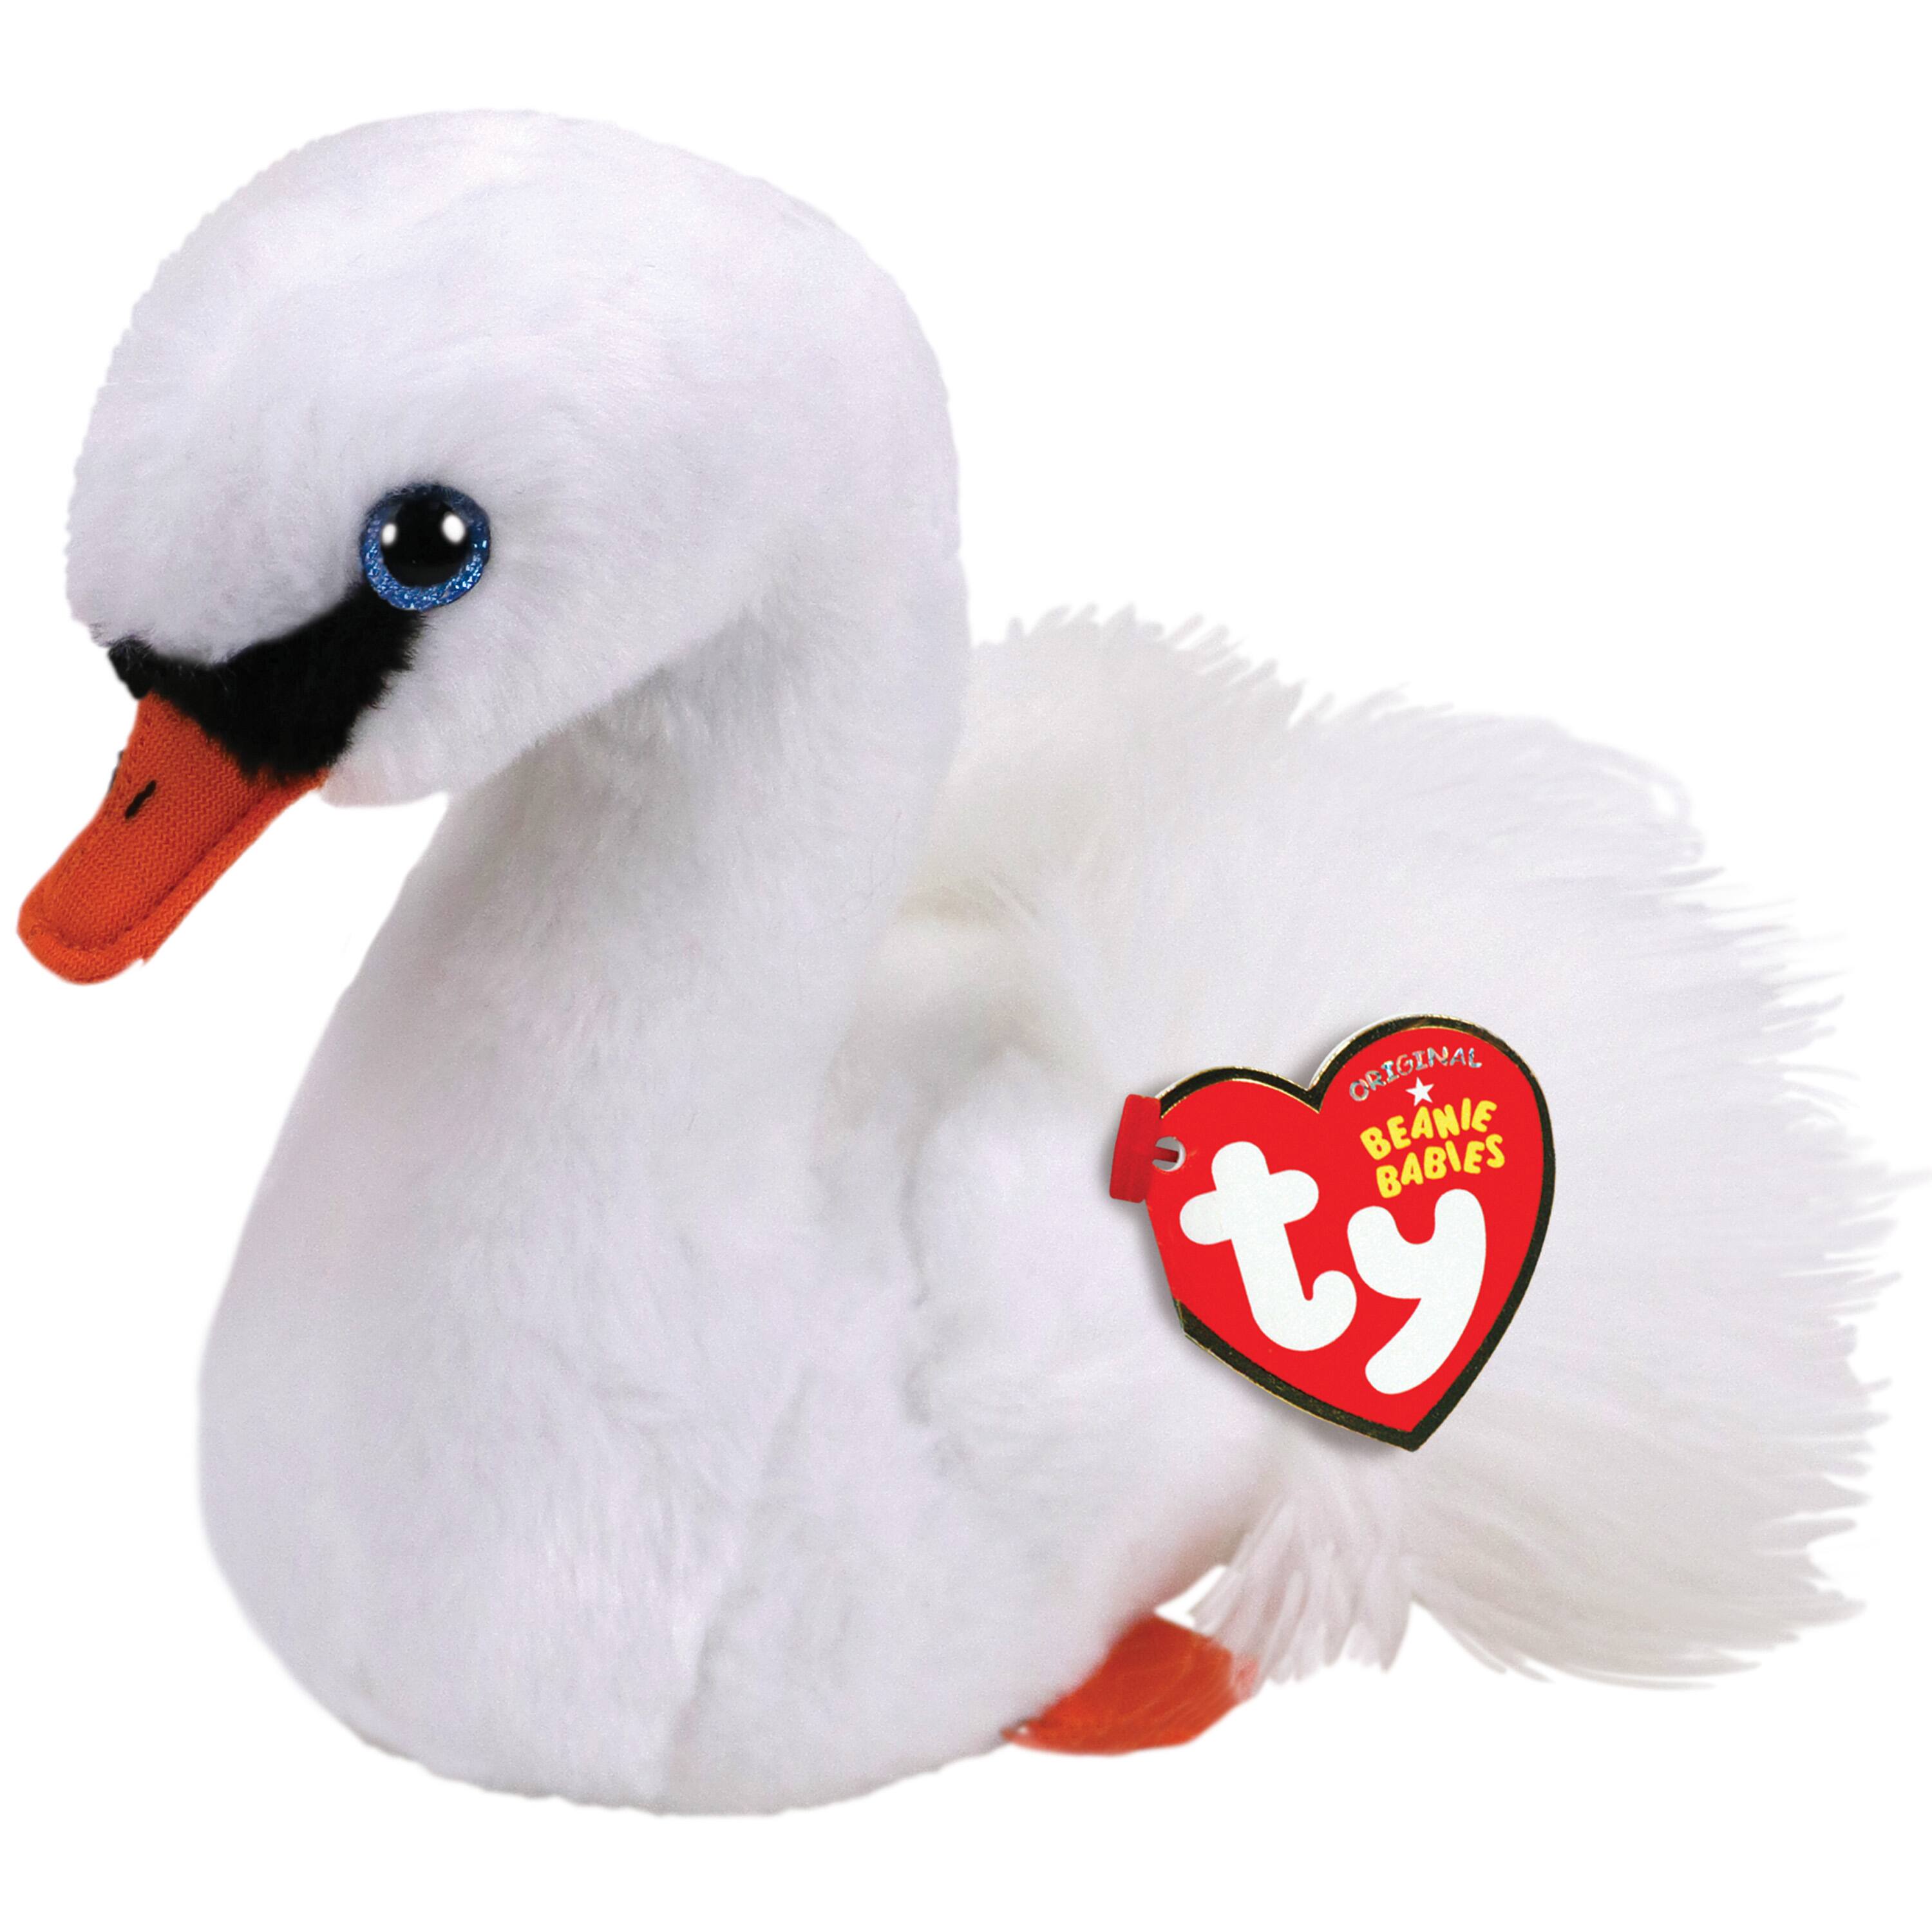 Details about   Gracie the swan.The Beanie Babies Collection... 